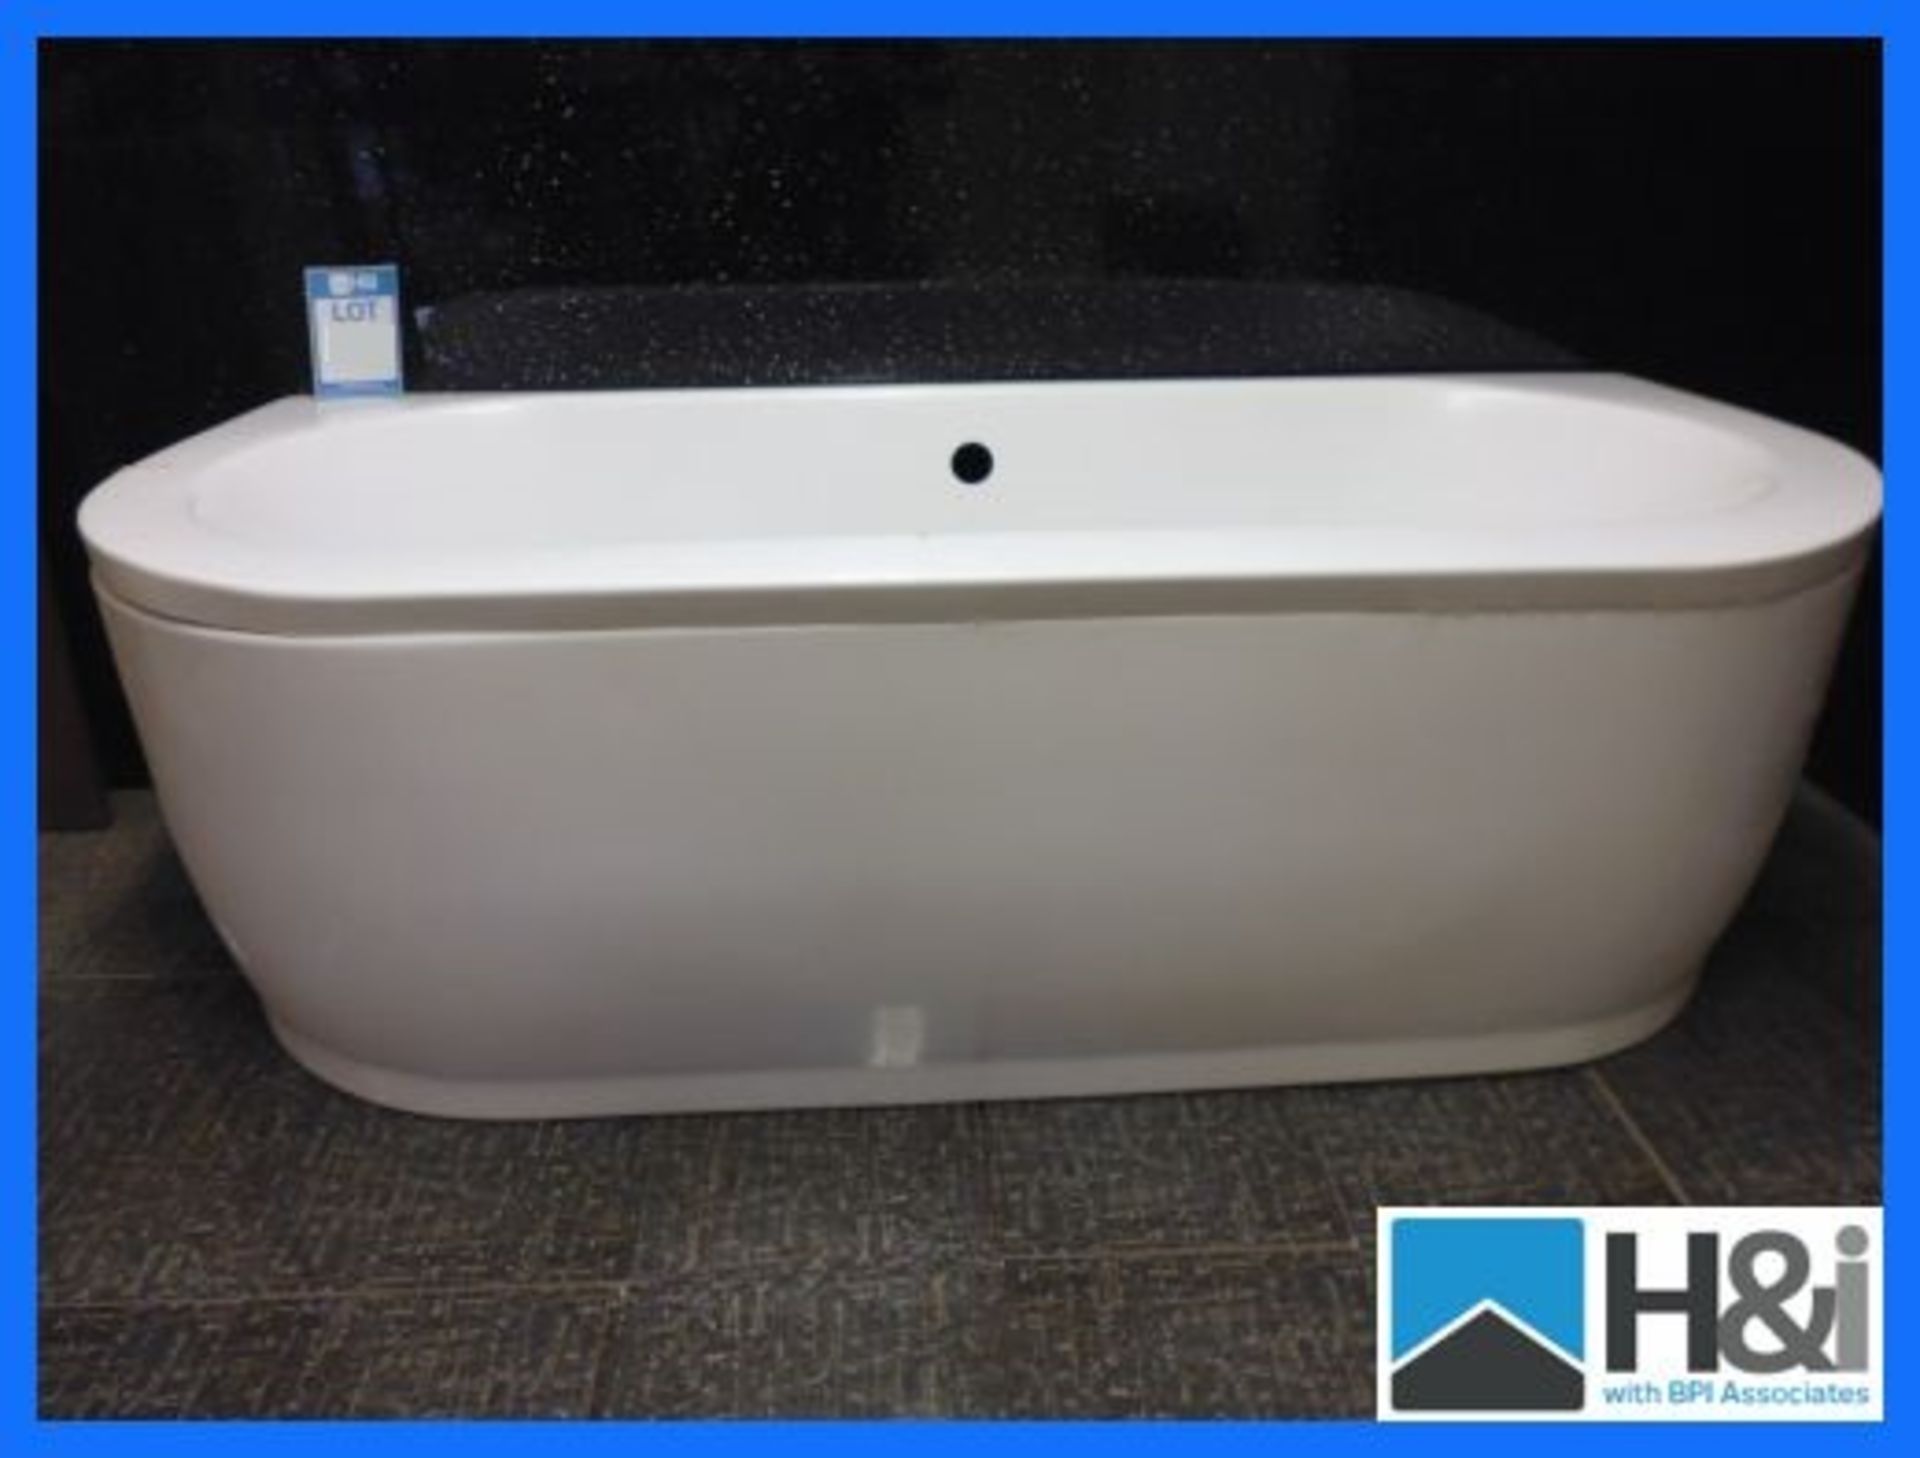 2 x Aldford Acrylic Back to Wall Bath. Height: 550mm, Width: 750mm, Length: 1700mm, Weight: 23kg,